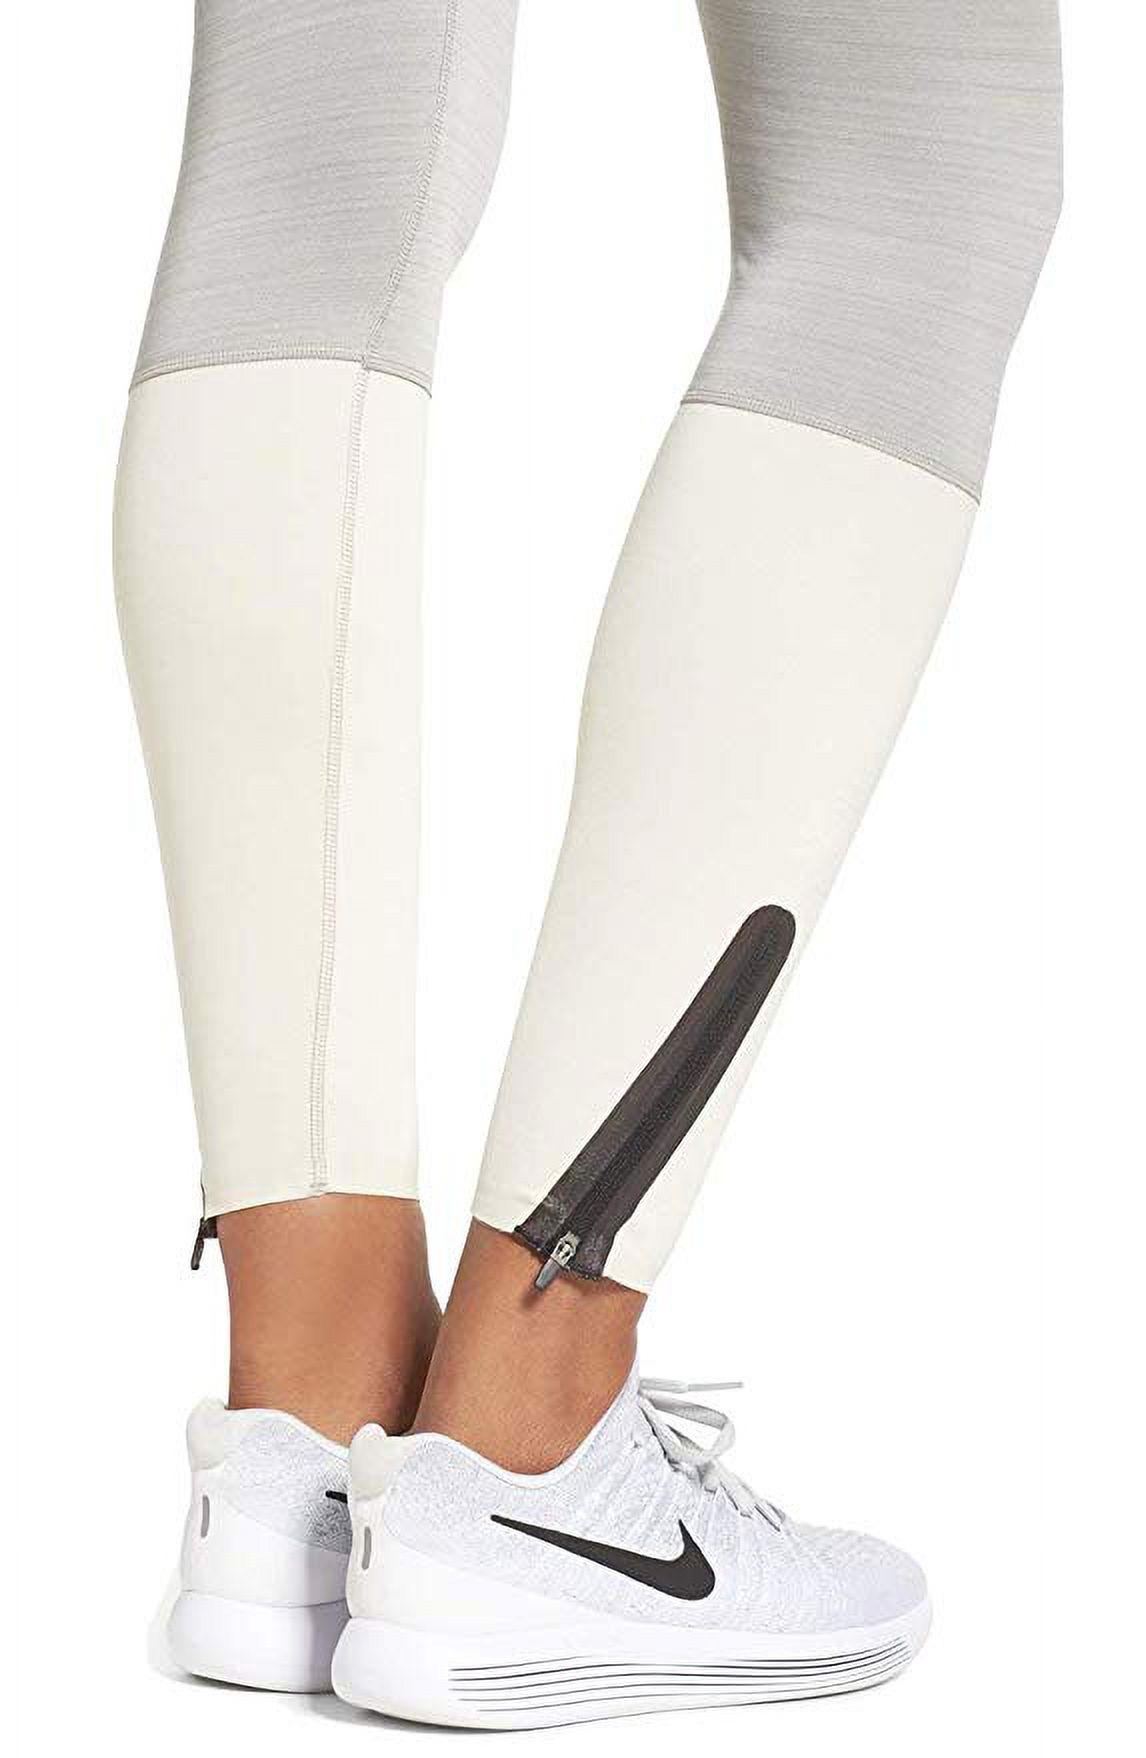 Nike Womens Legendary Mid Rise Zip Cuff Training Tights - image 2 of 3